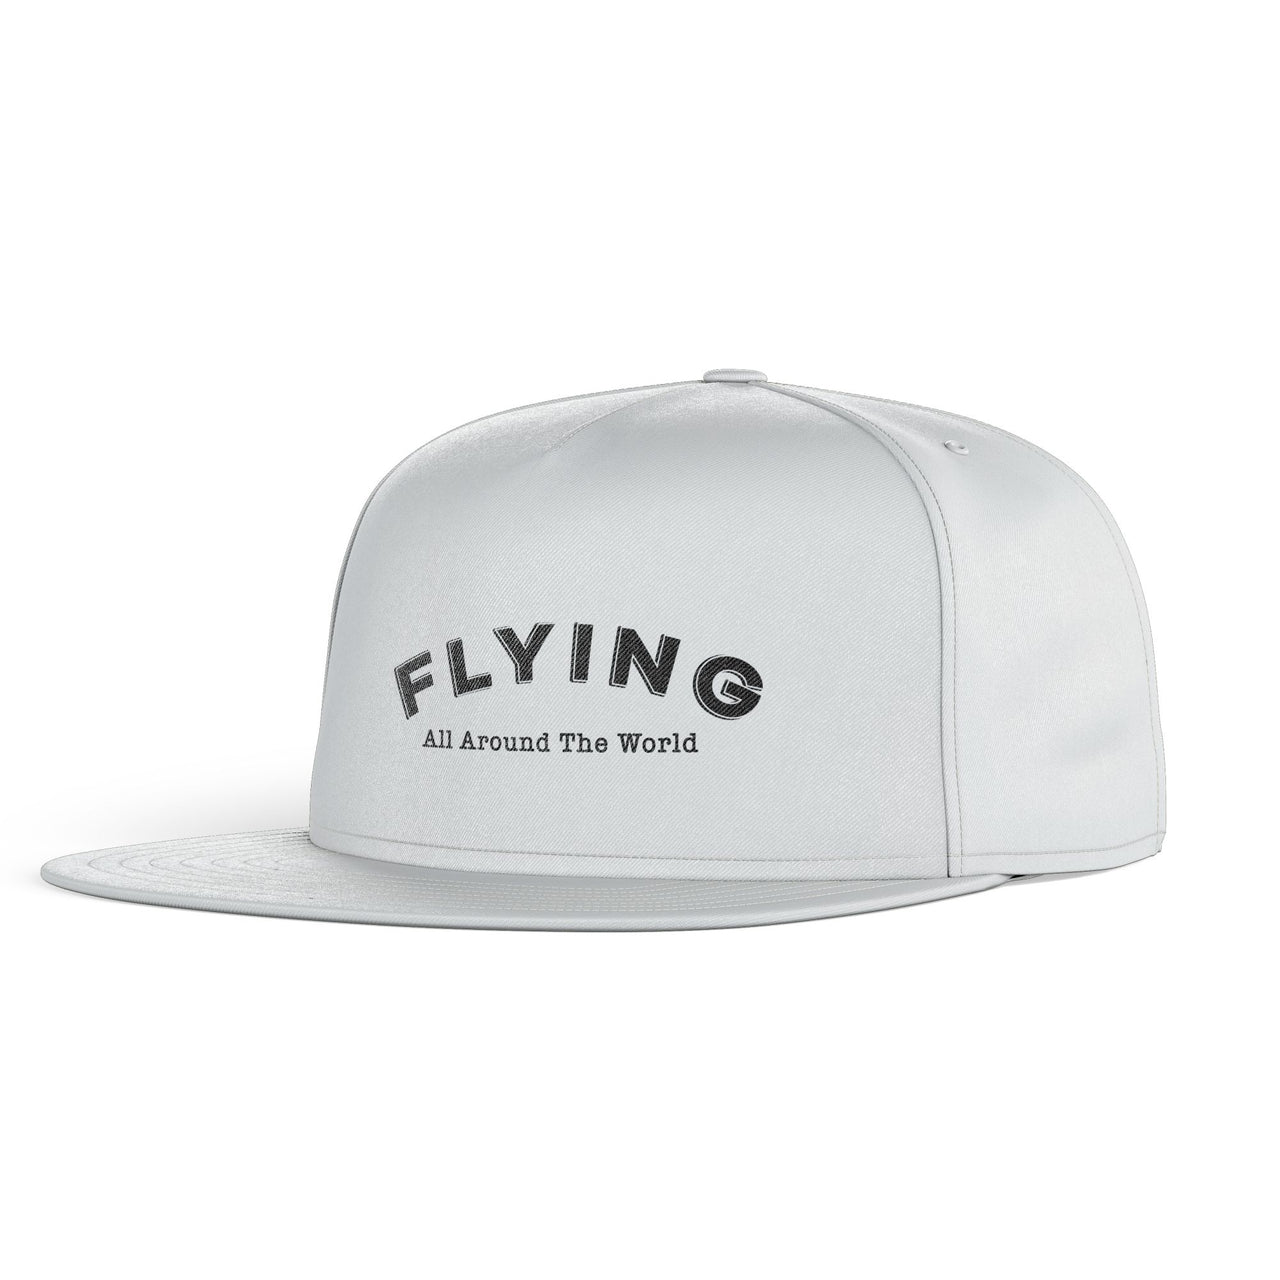 Flying All Around The World Designed Snapback Caps & Hats